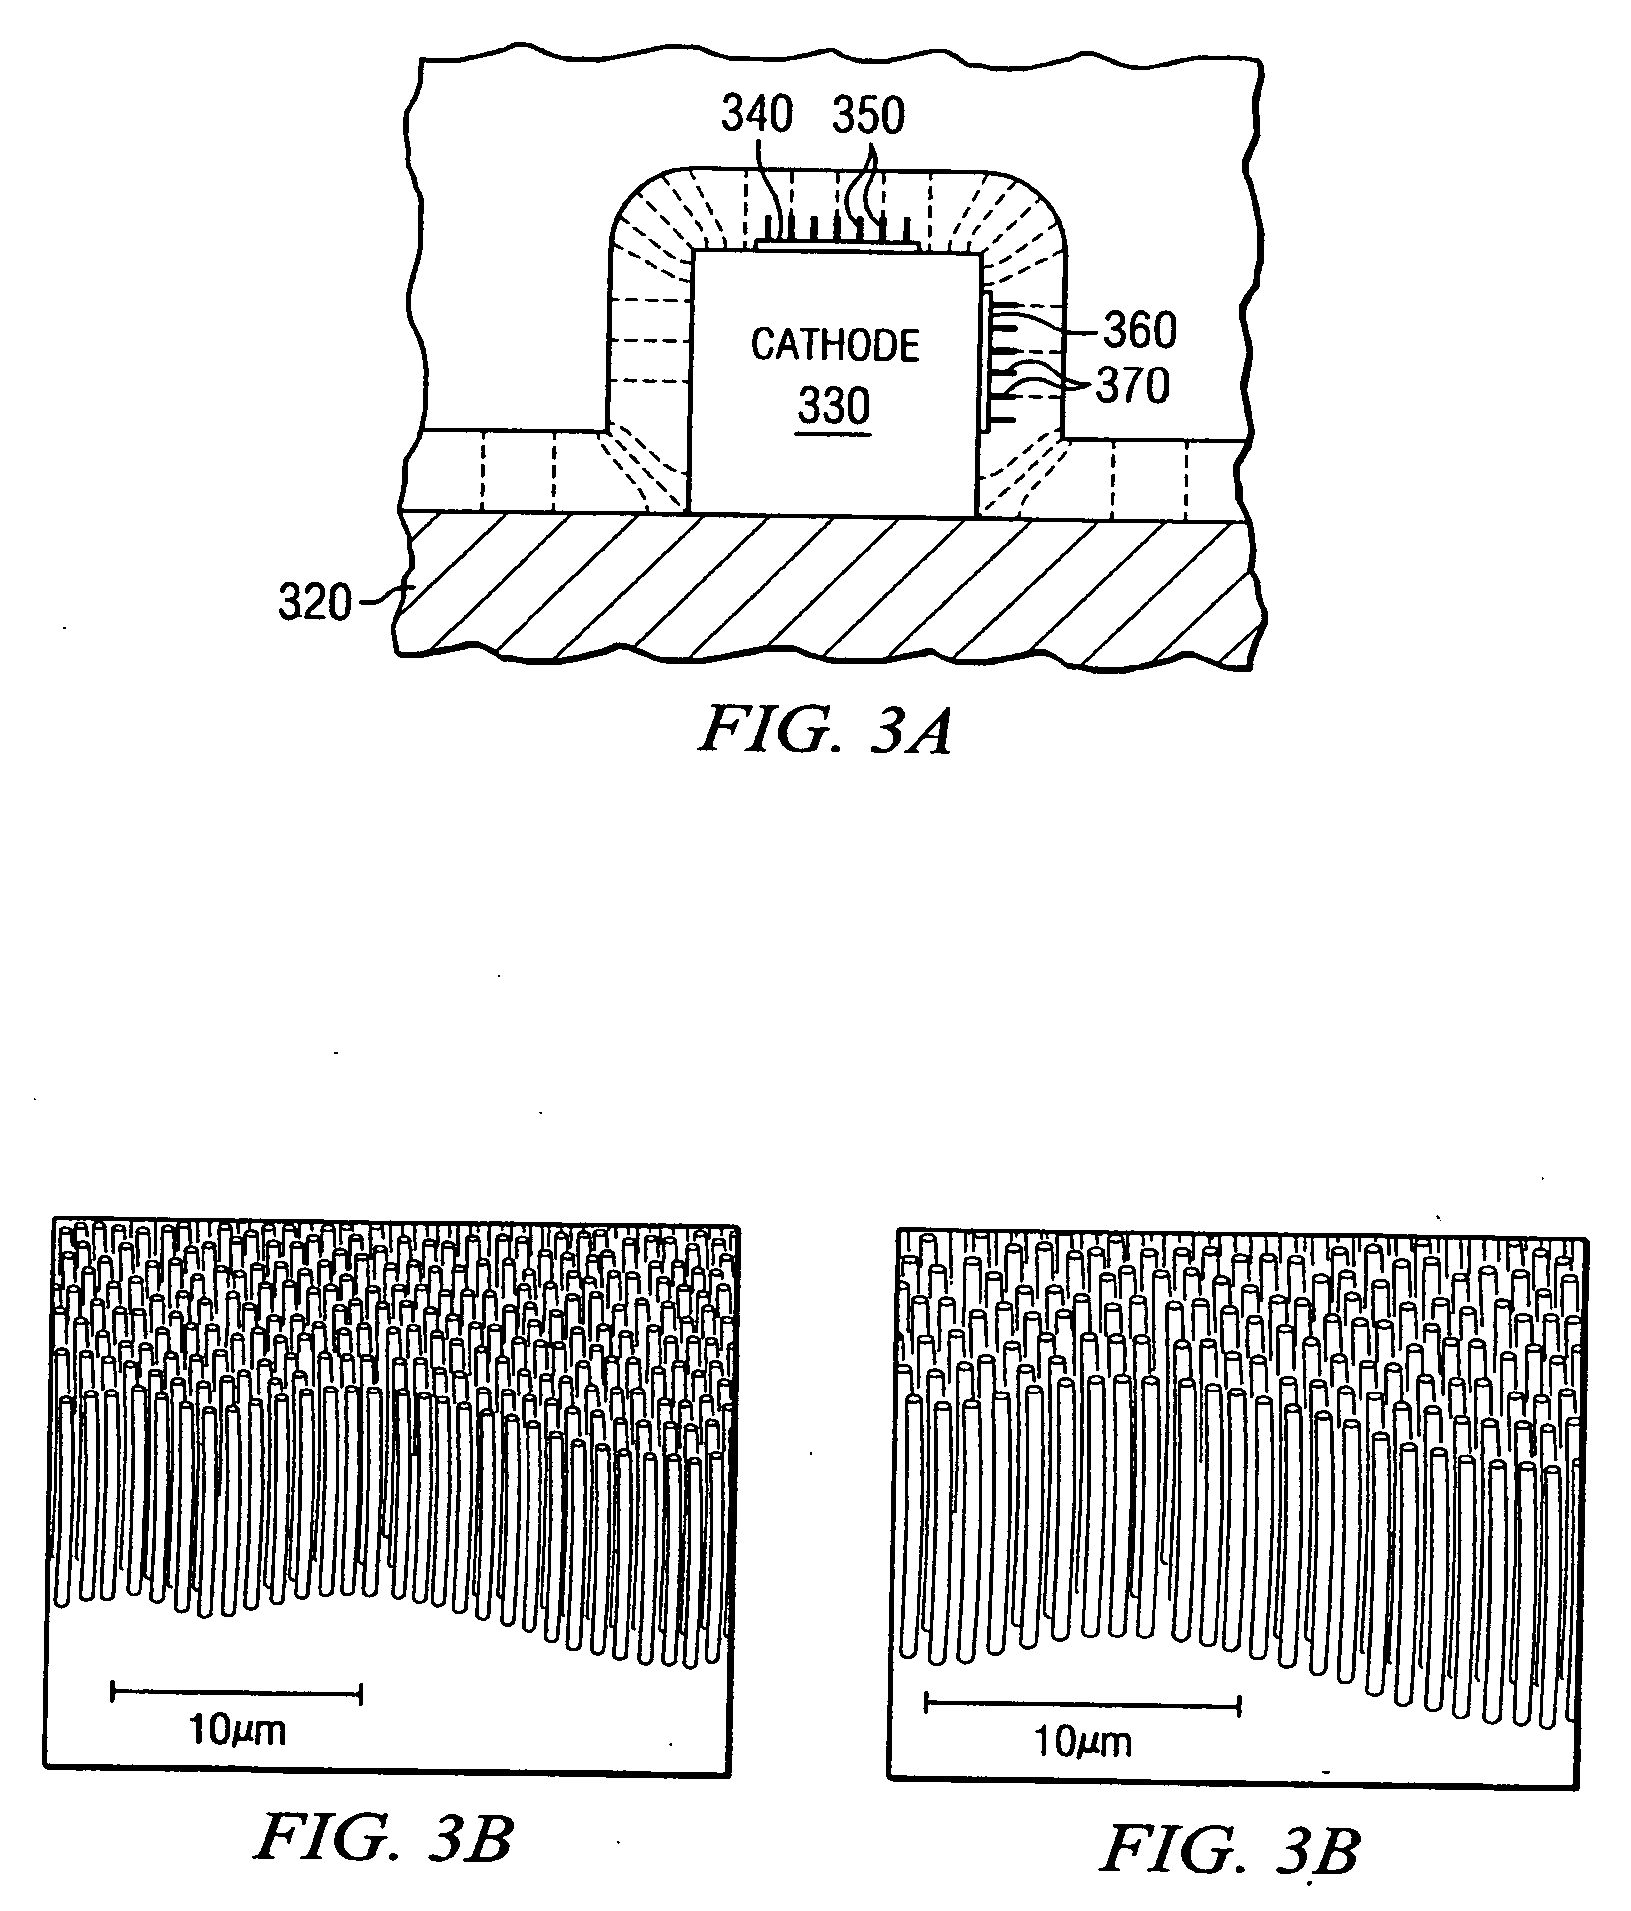 Apparatus for controlled alignment of catalytically grown nanostructures